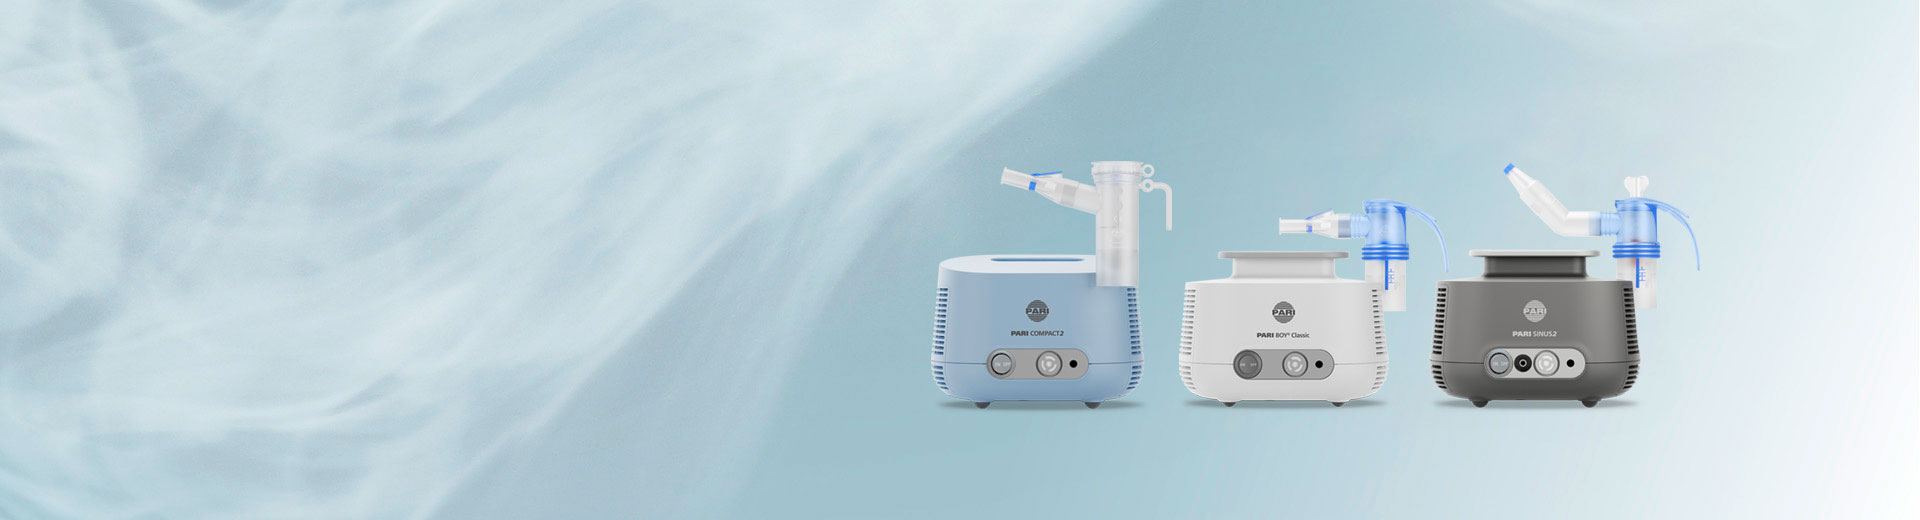 Our inhalation devices provide an effective and gentle way of treating respiratory diseases.